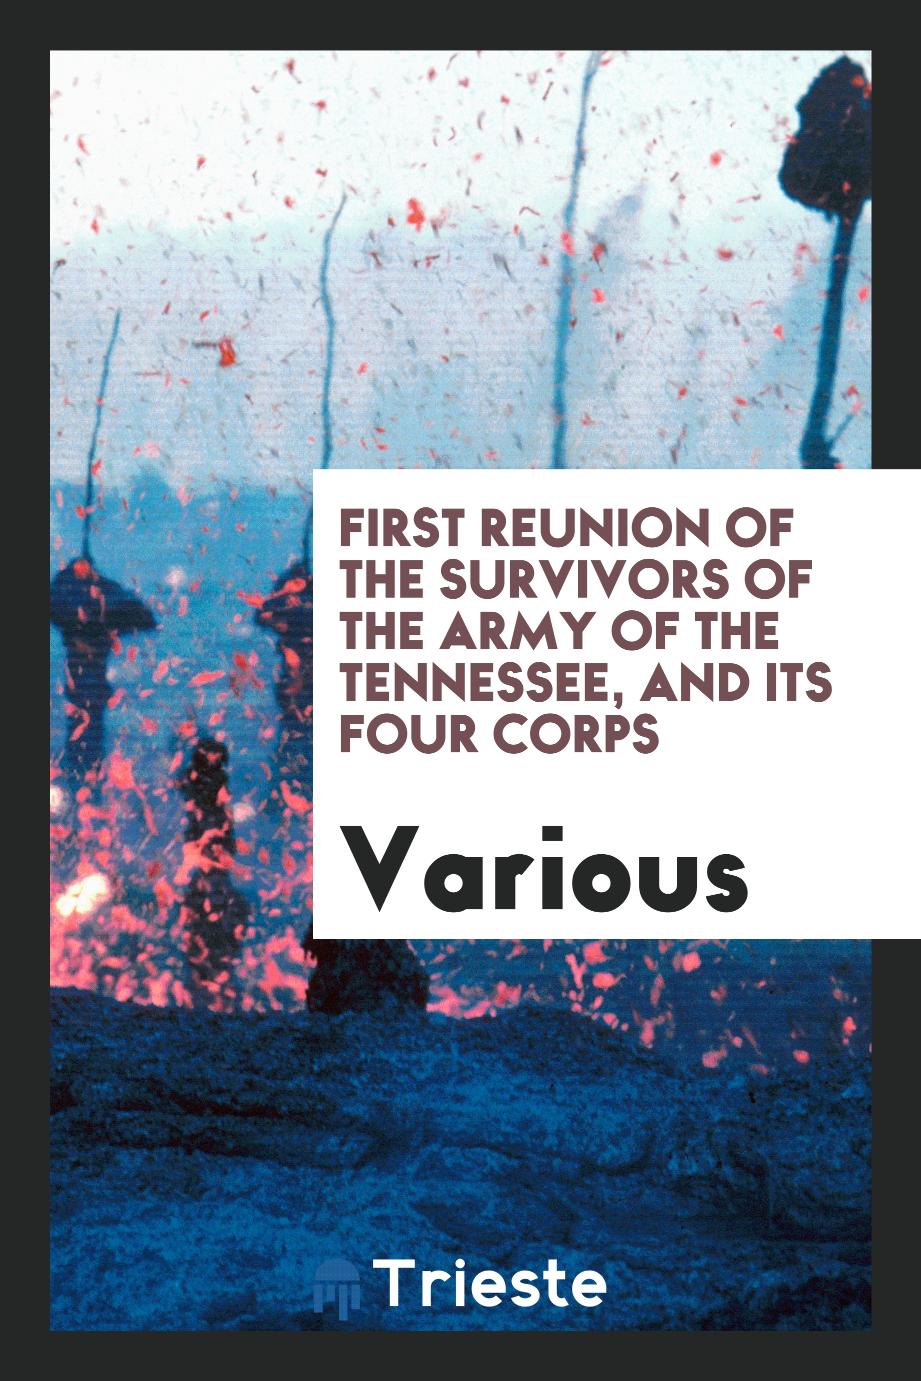 First Reunion of the Survivors of the Army of the Tennessee, and Its Four Corps